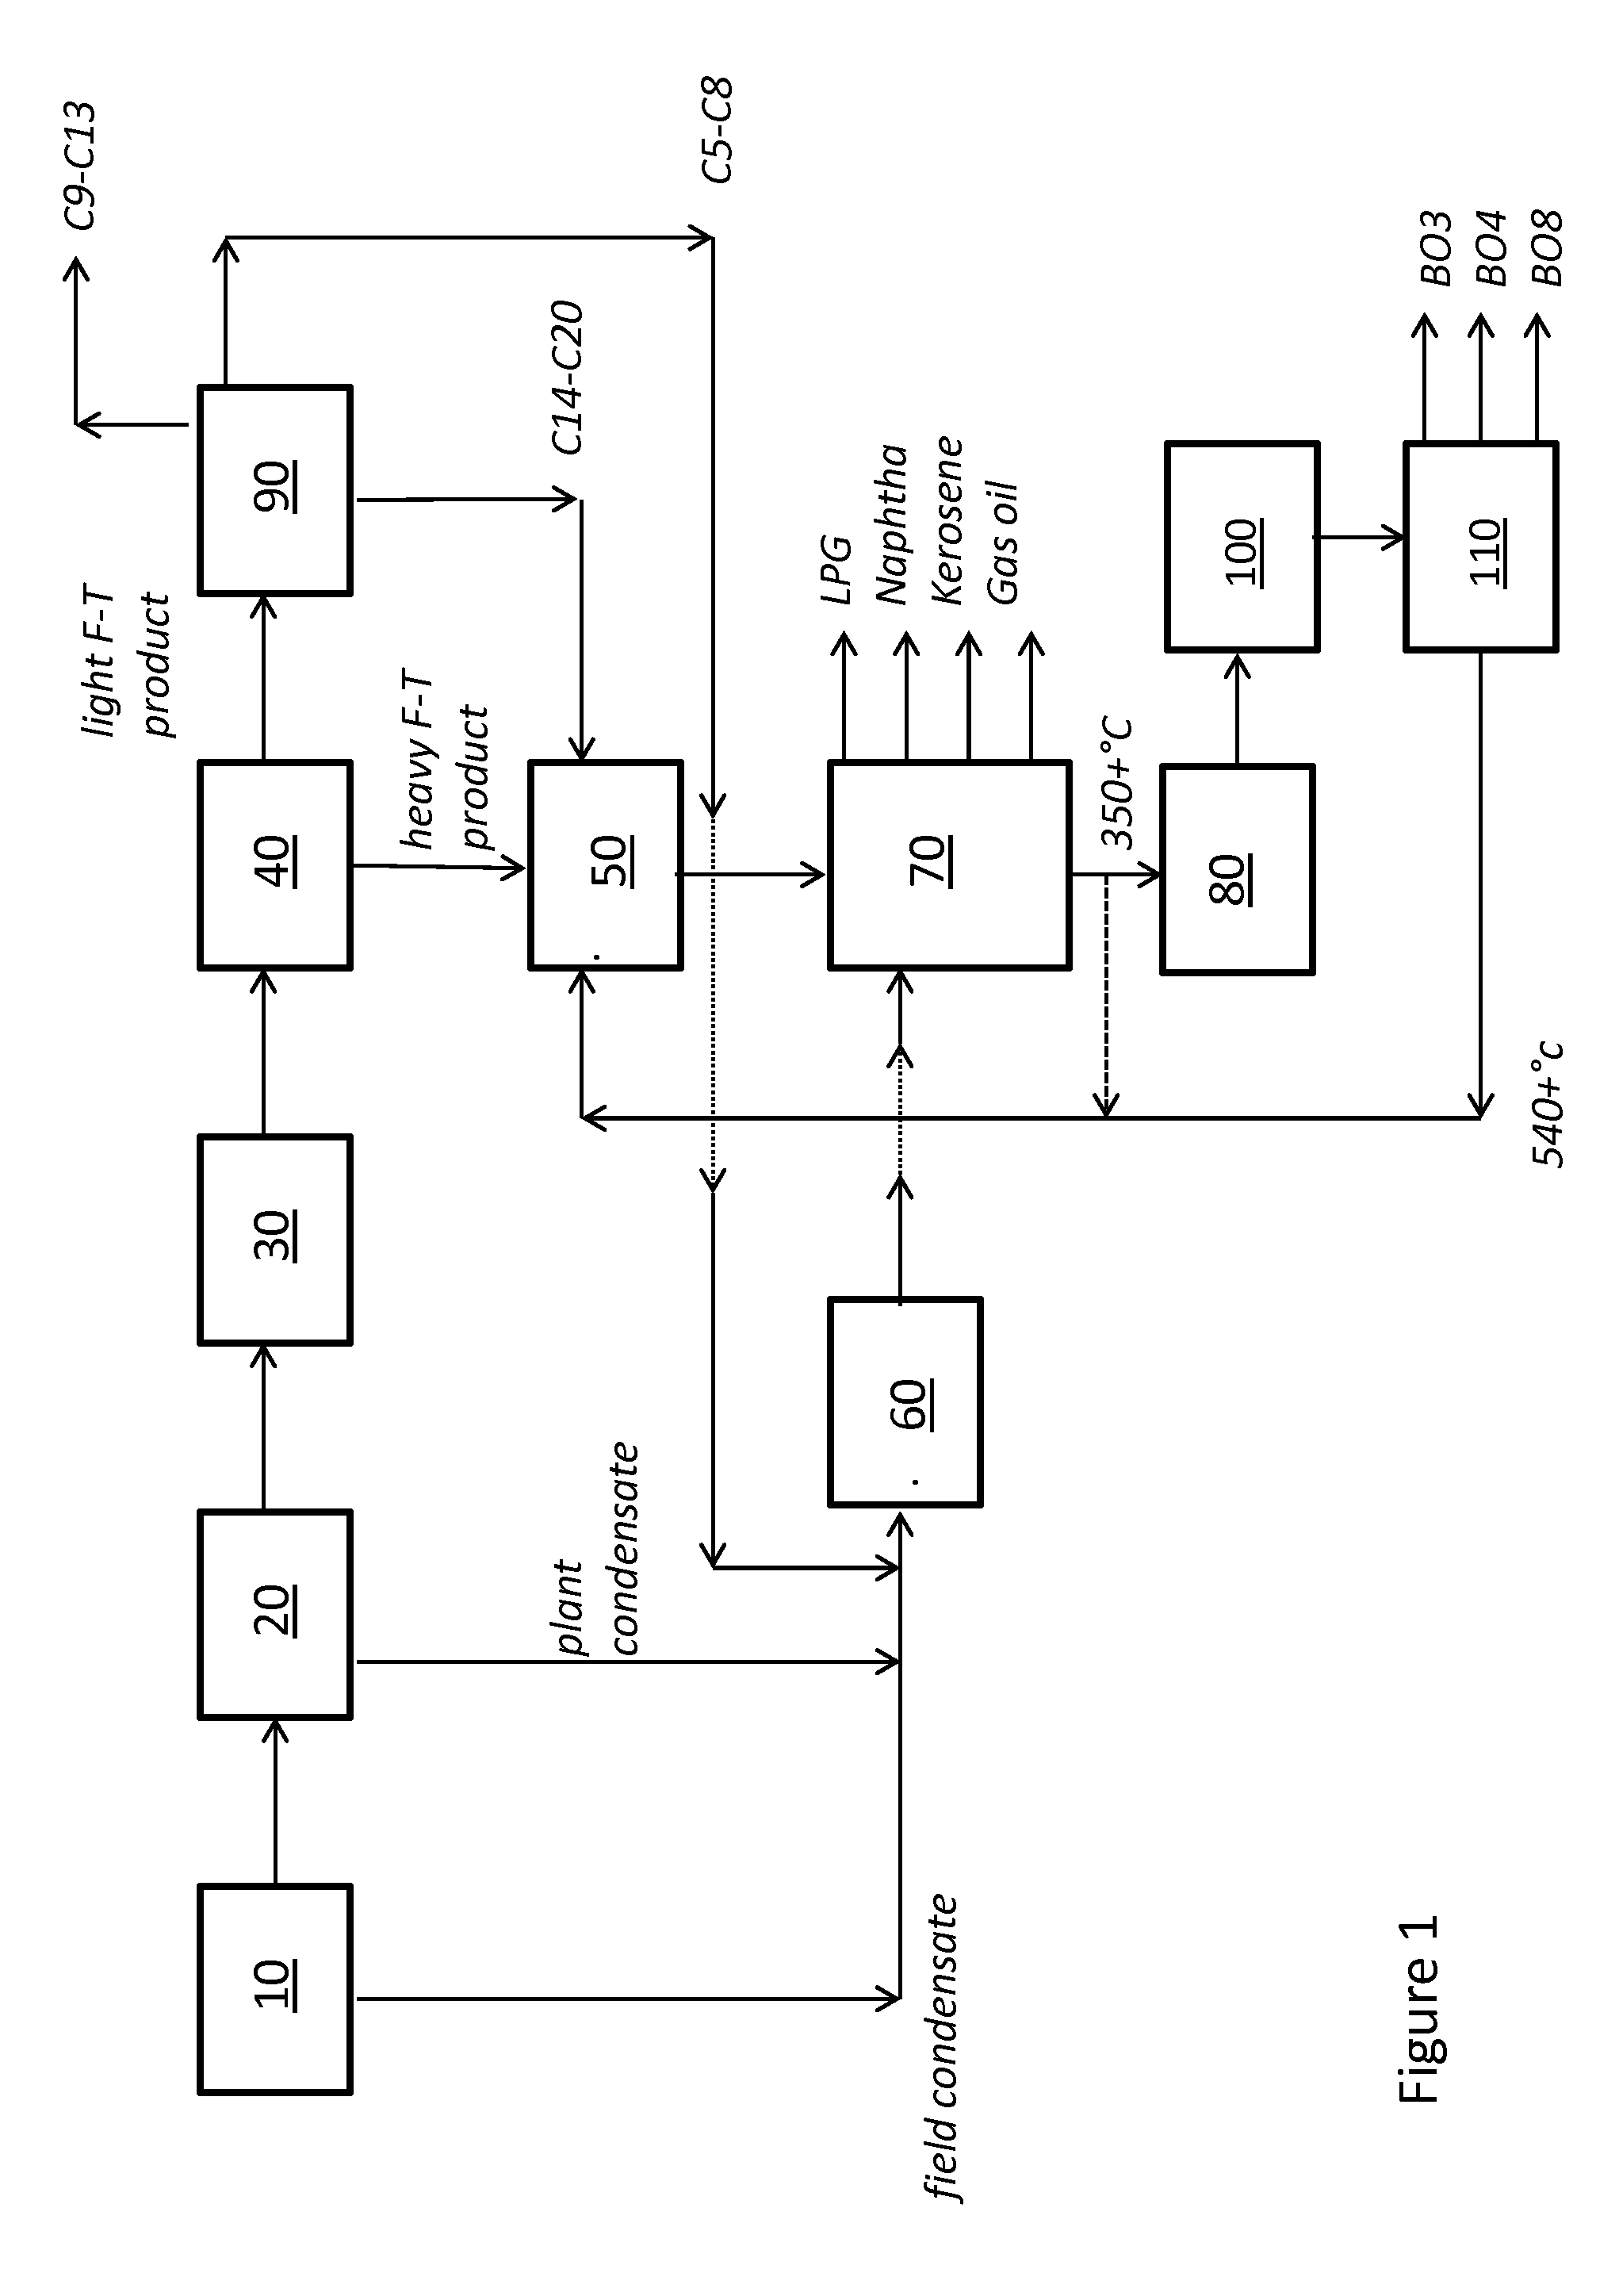 Integrated gas-to-liquids condensate process